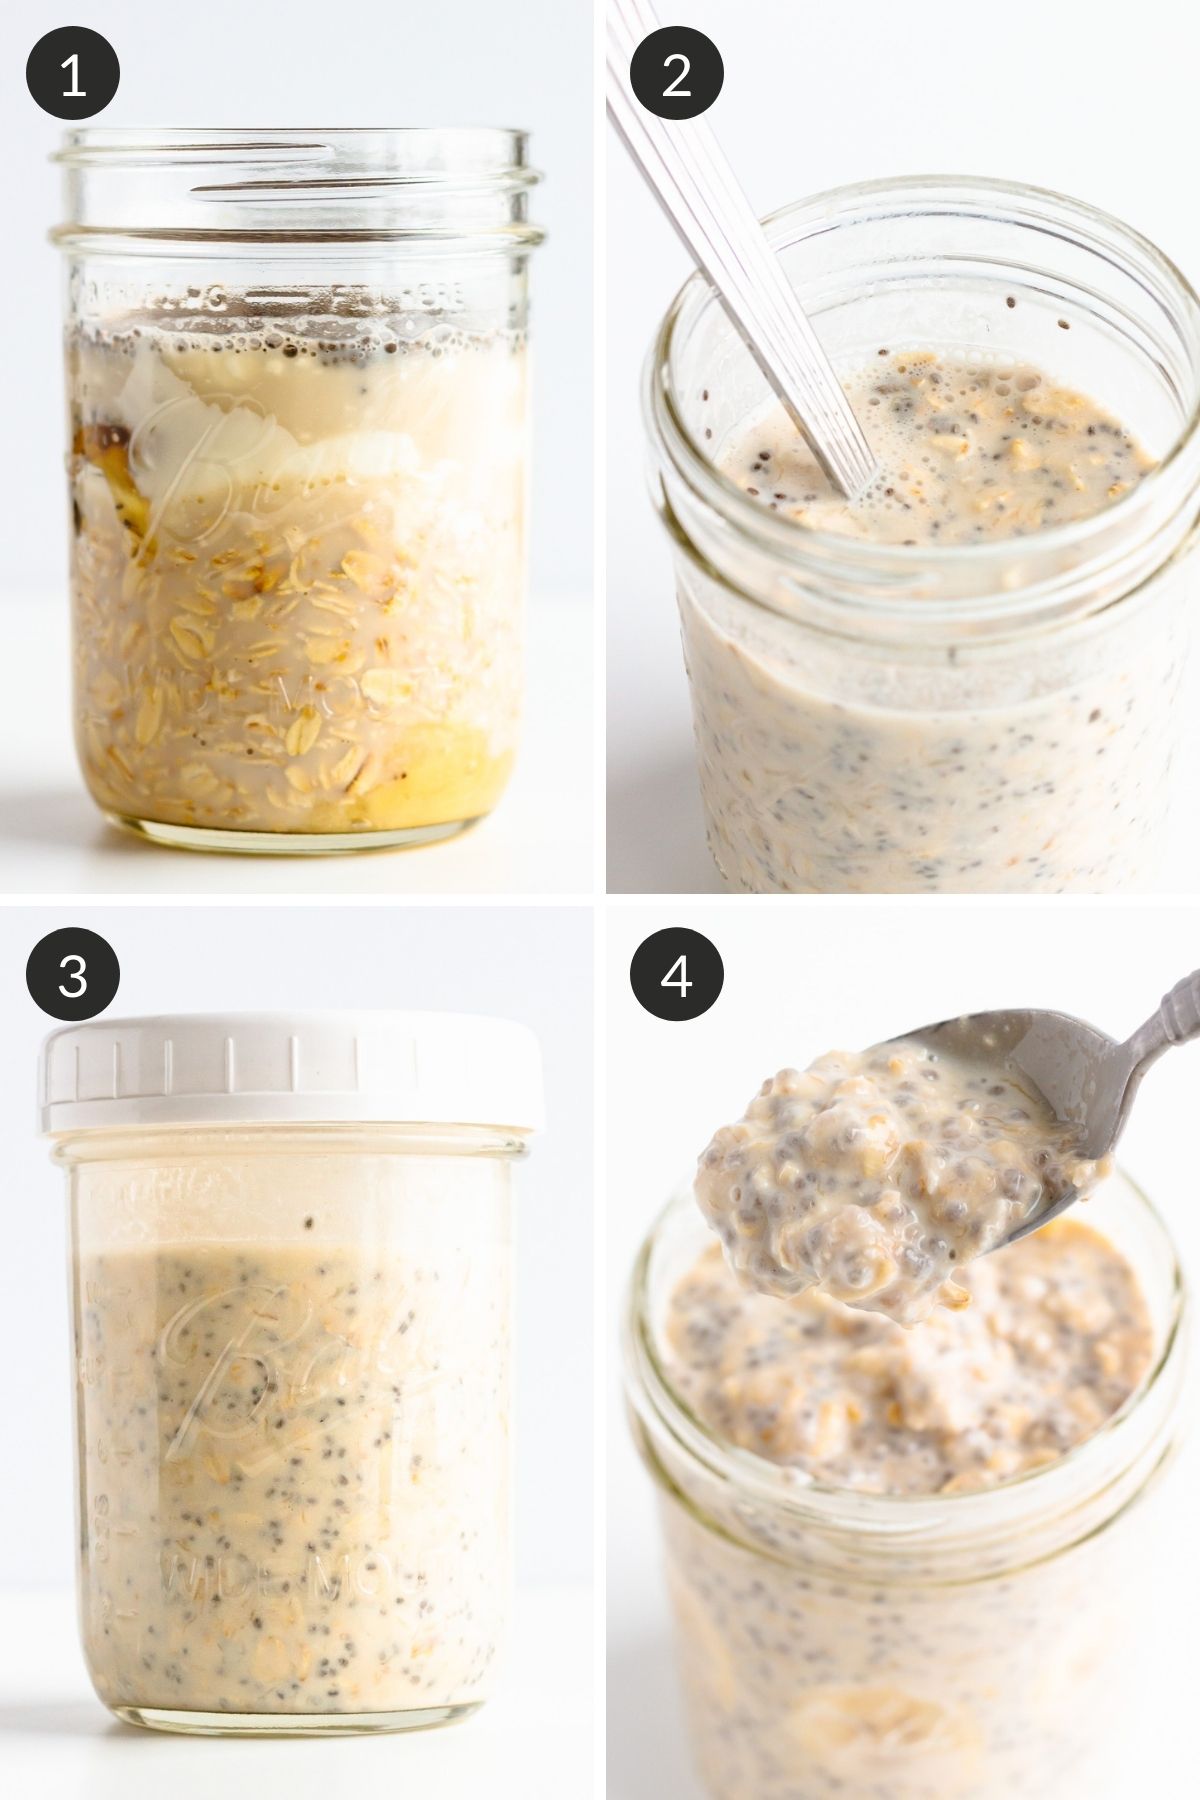 Step by step collage showing how to make banana overnight oats in a jar.